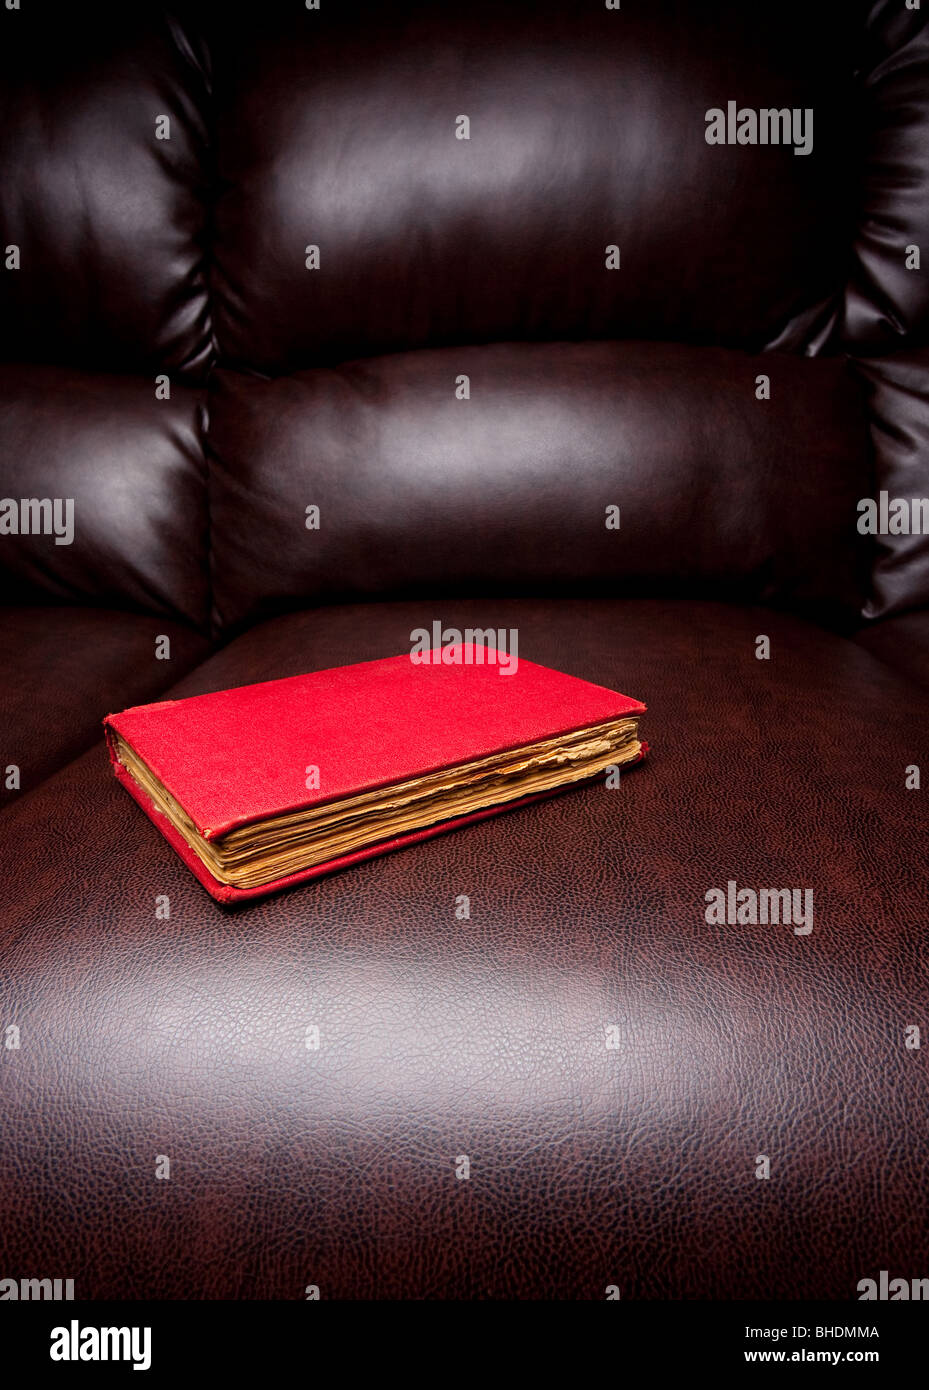 Close up of a vintage book on a brown leather sofa Stock Photo